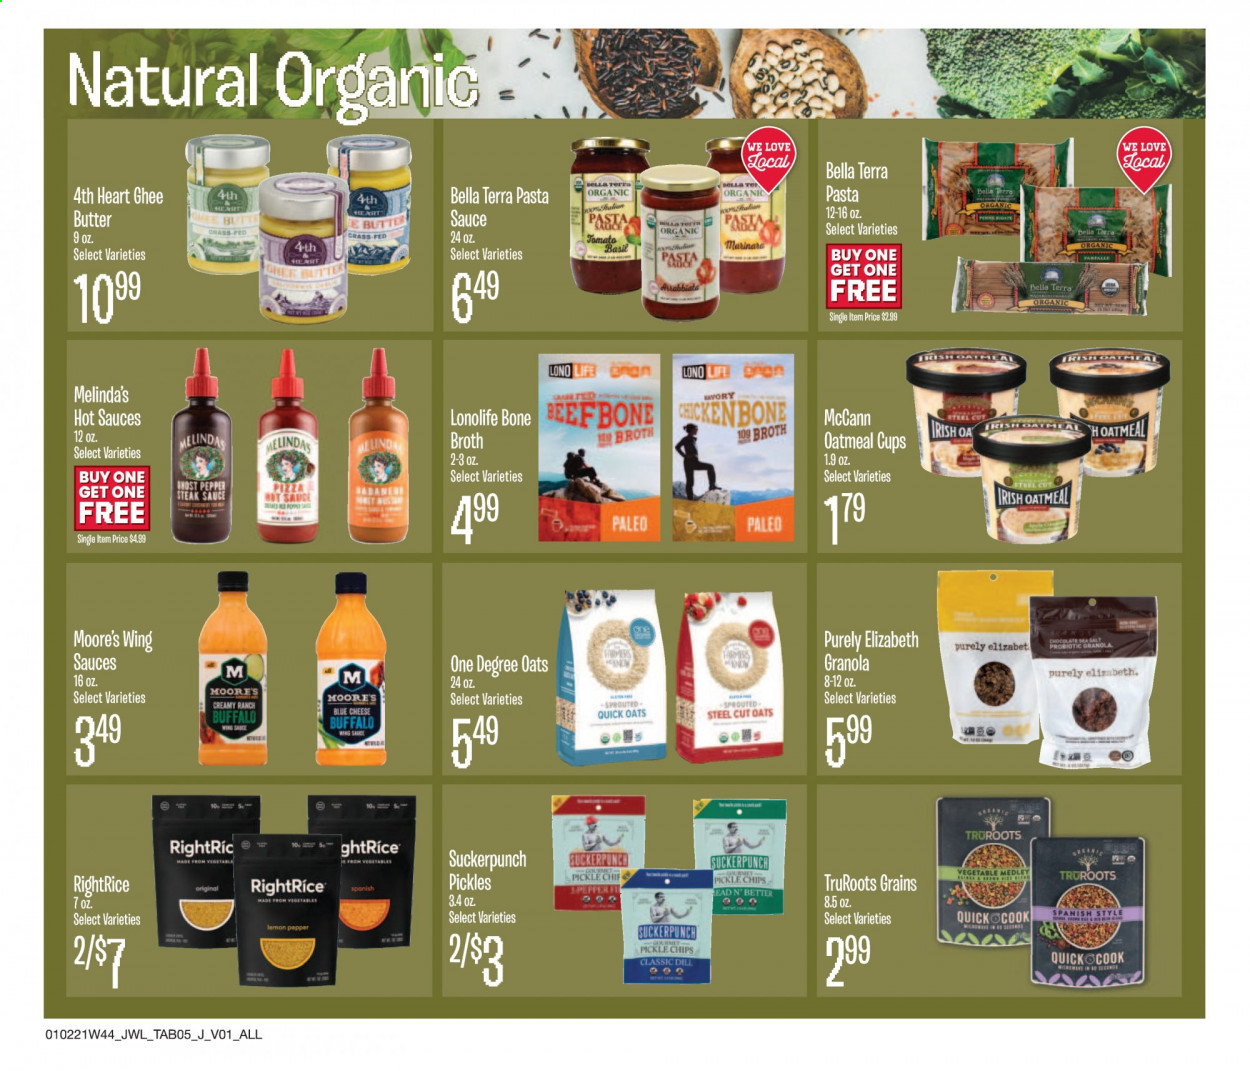 thumbnail - Jewel Osco Flyer - 01/02/2021 - 01/26/2021 - Sales products - pickles, pizza, blue cheese, cheese, butter, ghee, chocolate, chips, oatmeal, oats, broth, granola, Quick Oats, penne, esponja, steak sauce, hot sauce, pasta sauce, wing sauce, steak, Bella, cup. Page 5.